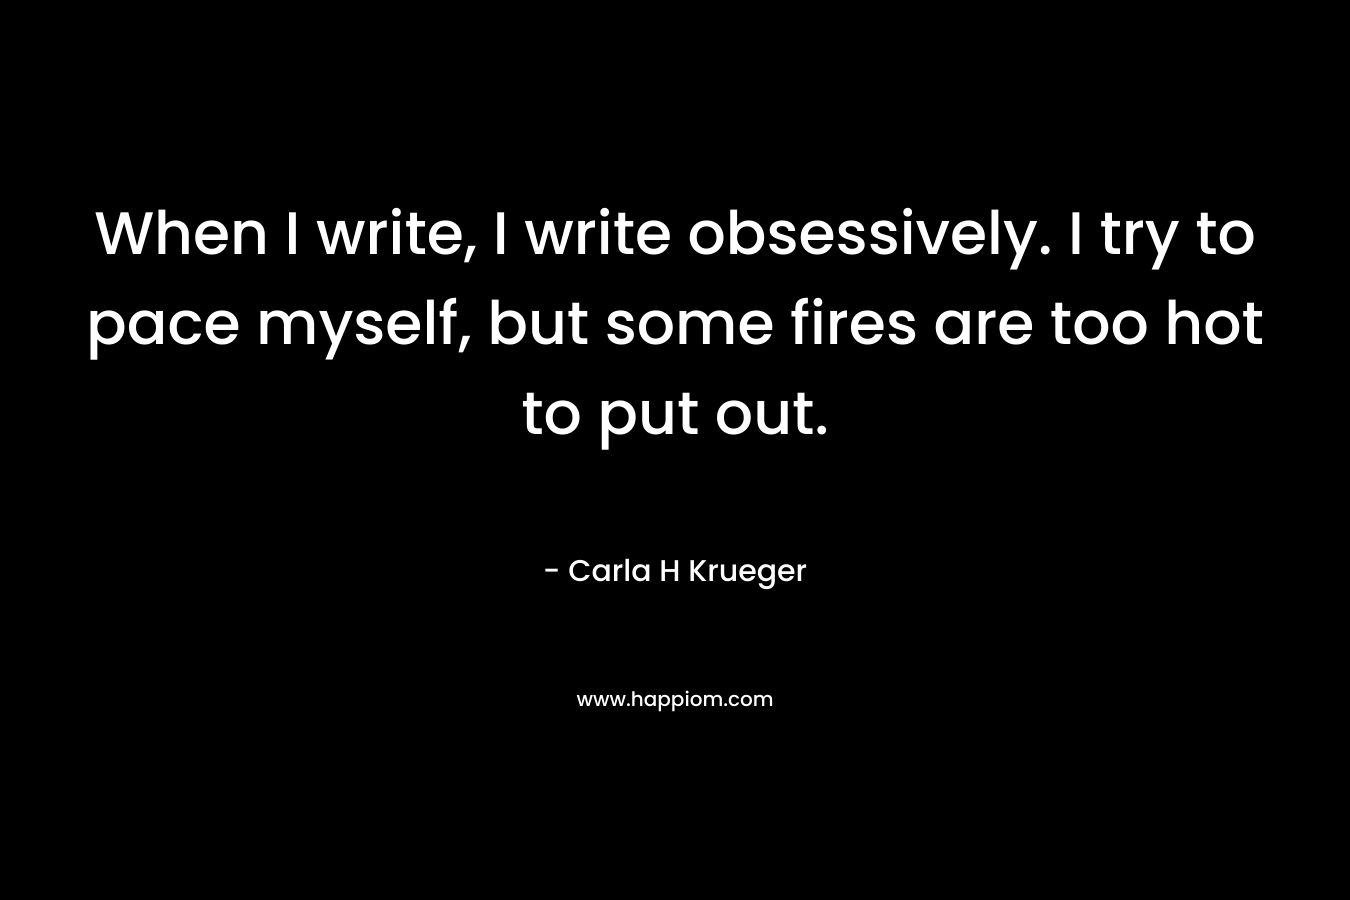 When I write, I write obsessively. I try to pace myself, but some fires are too hot to put out. – Carla H Krueger